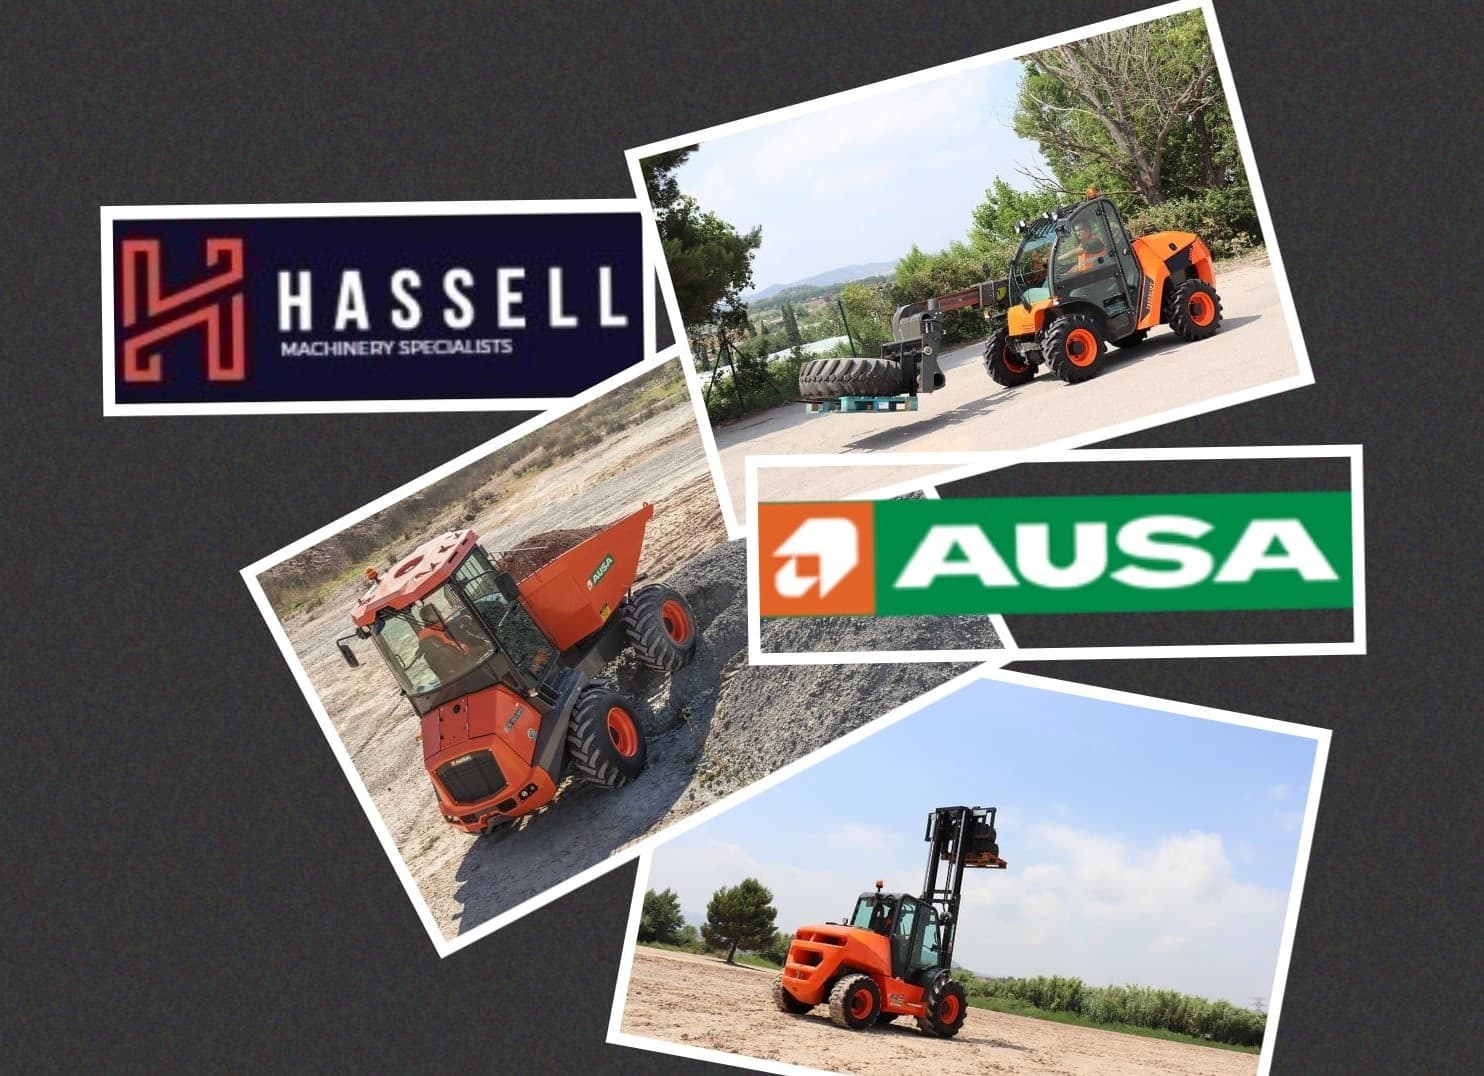 HASSELL’S ADD AUSA TO THE PORTFOLIO